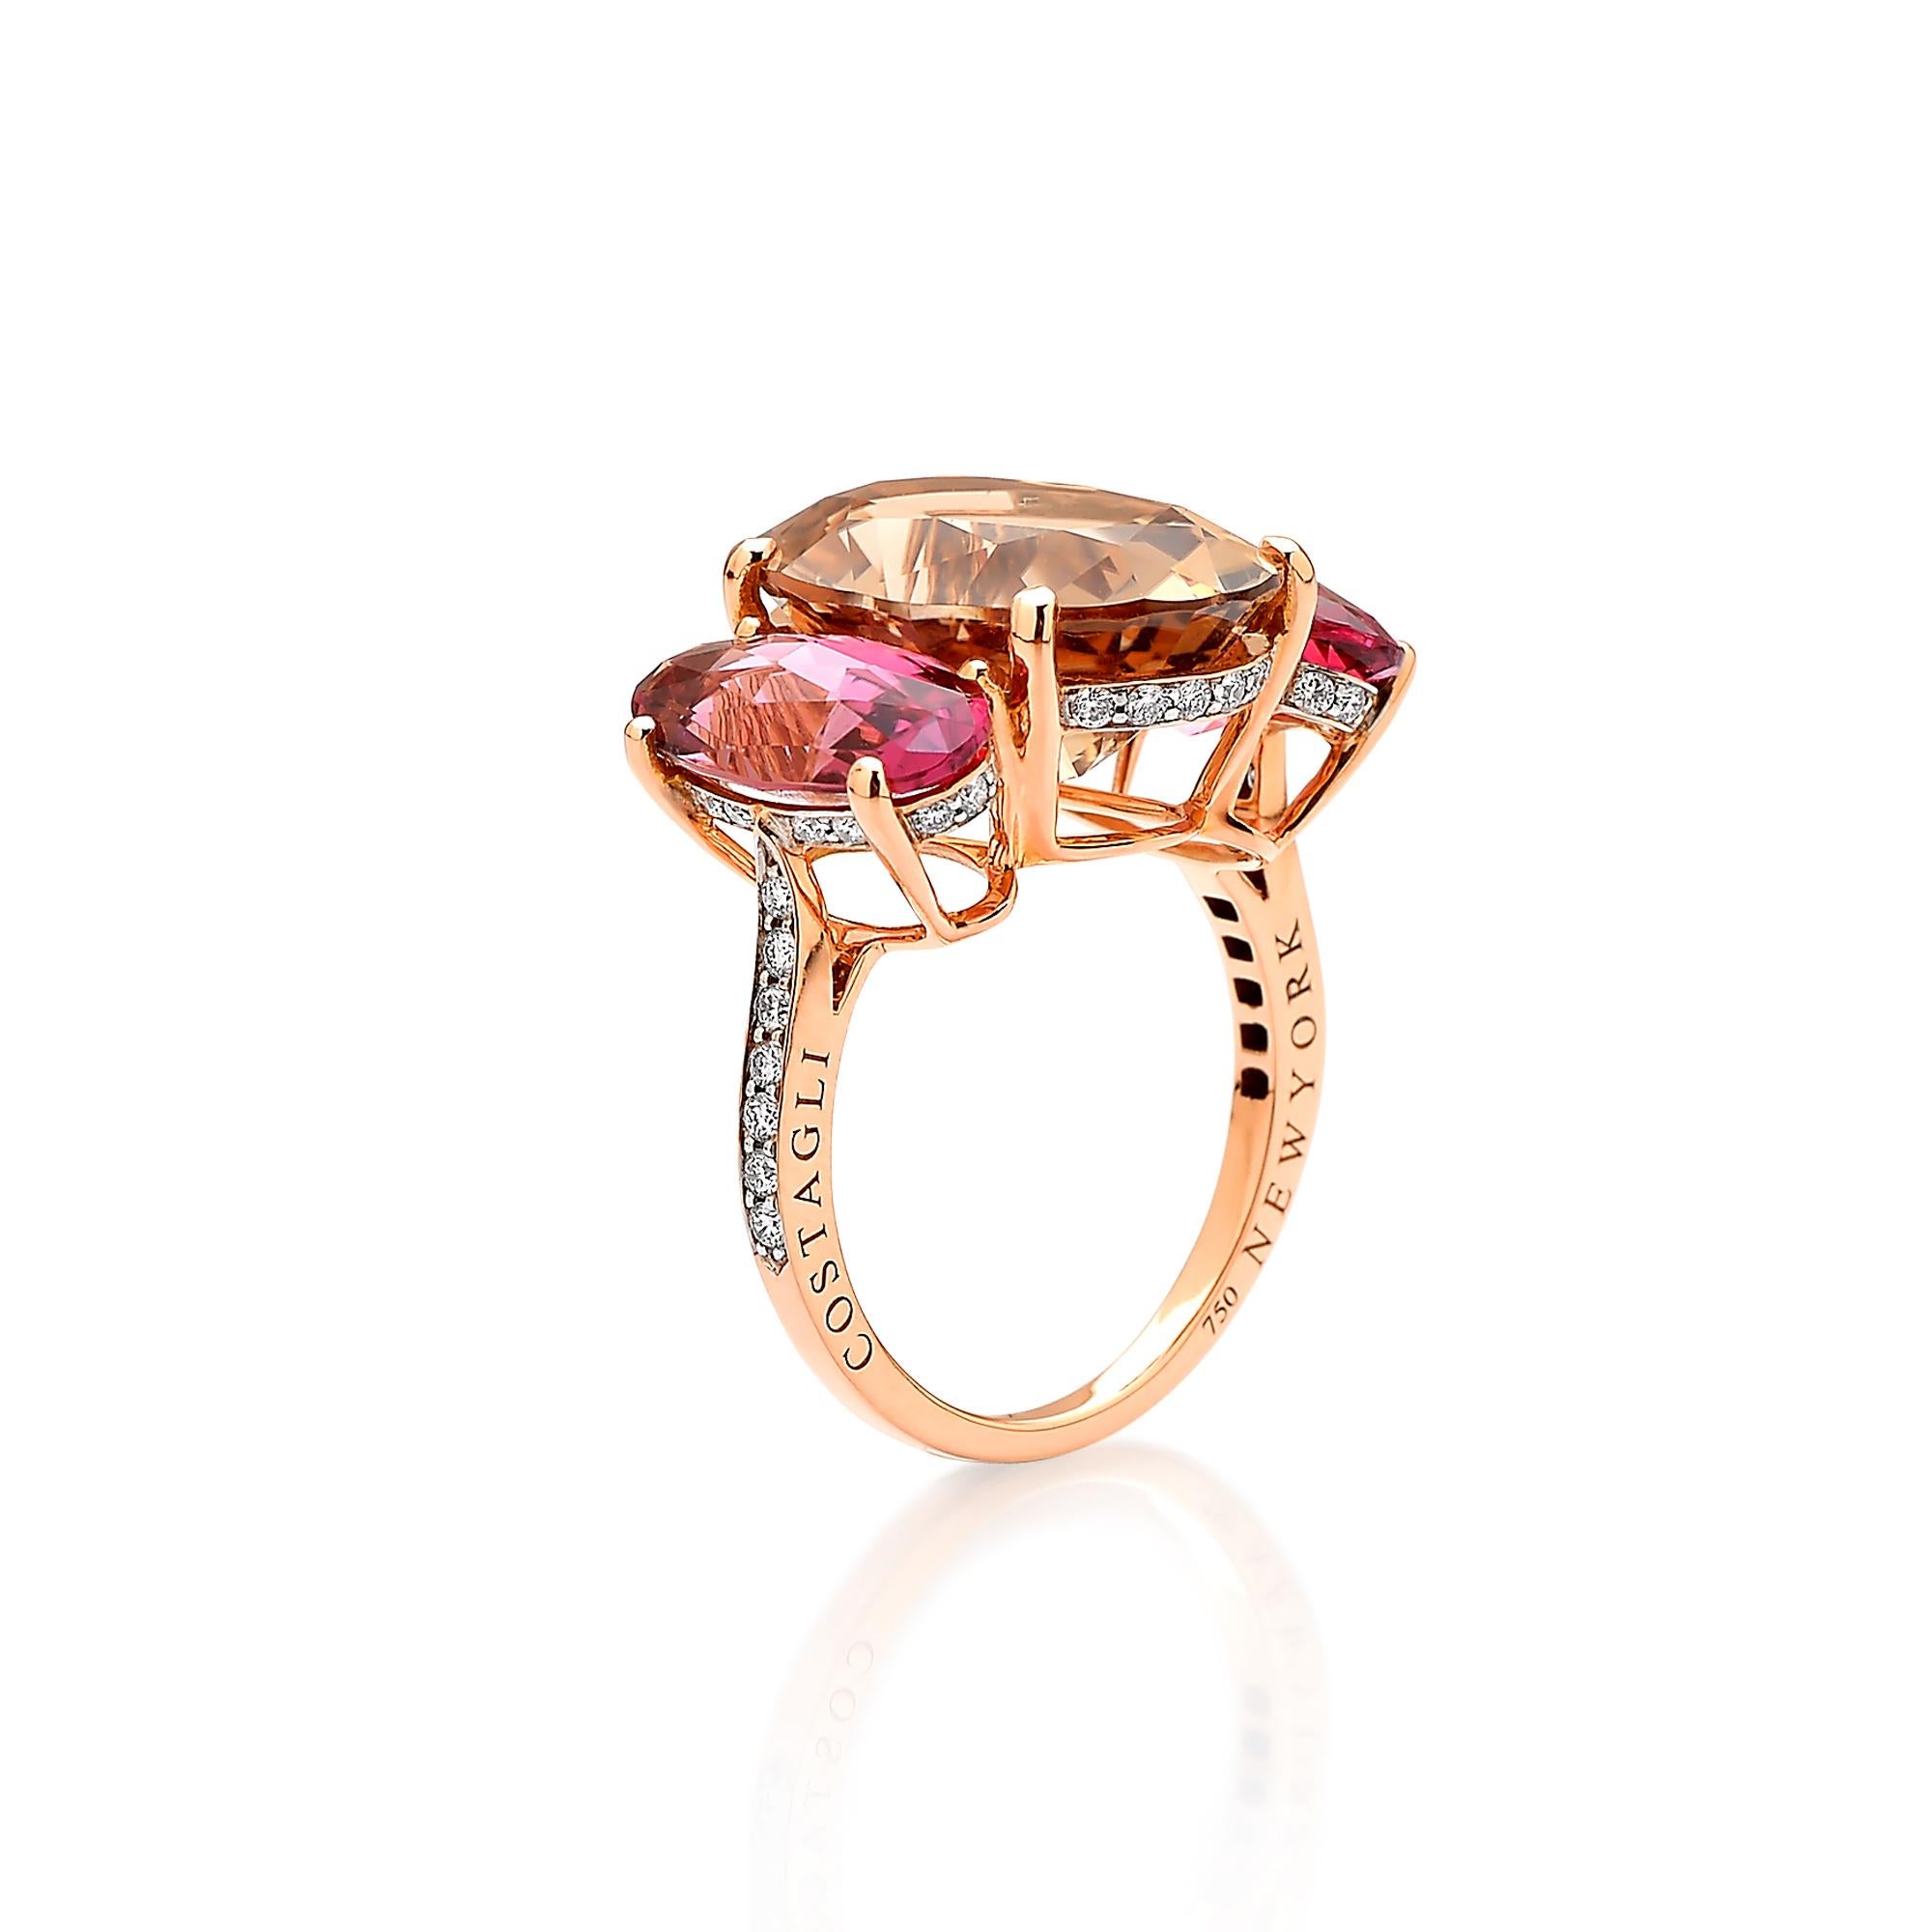 One of a kind oval shape champagne tourmaline ring flanked by long oval shape pink tourmalines set in 18kt rose gold with pave-set round, brilliant diamond detailing.

The warm, rich hues of the champagne and pink tourmaline stones paired with their